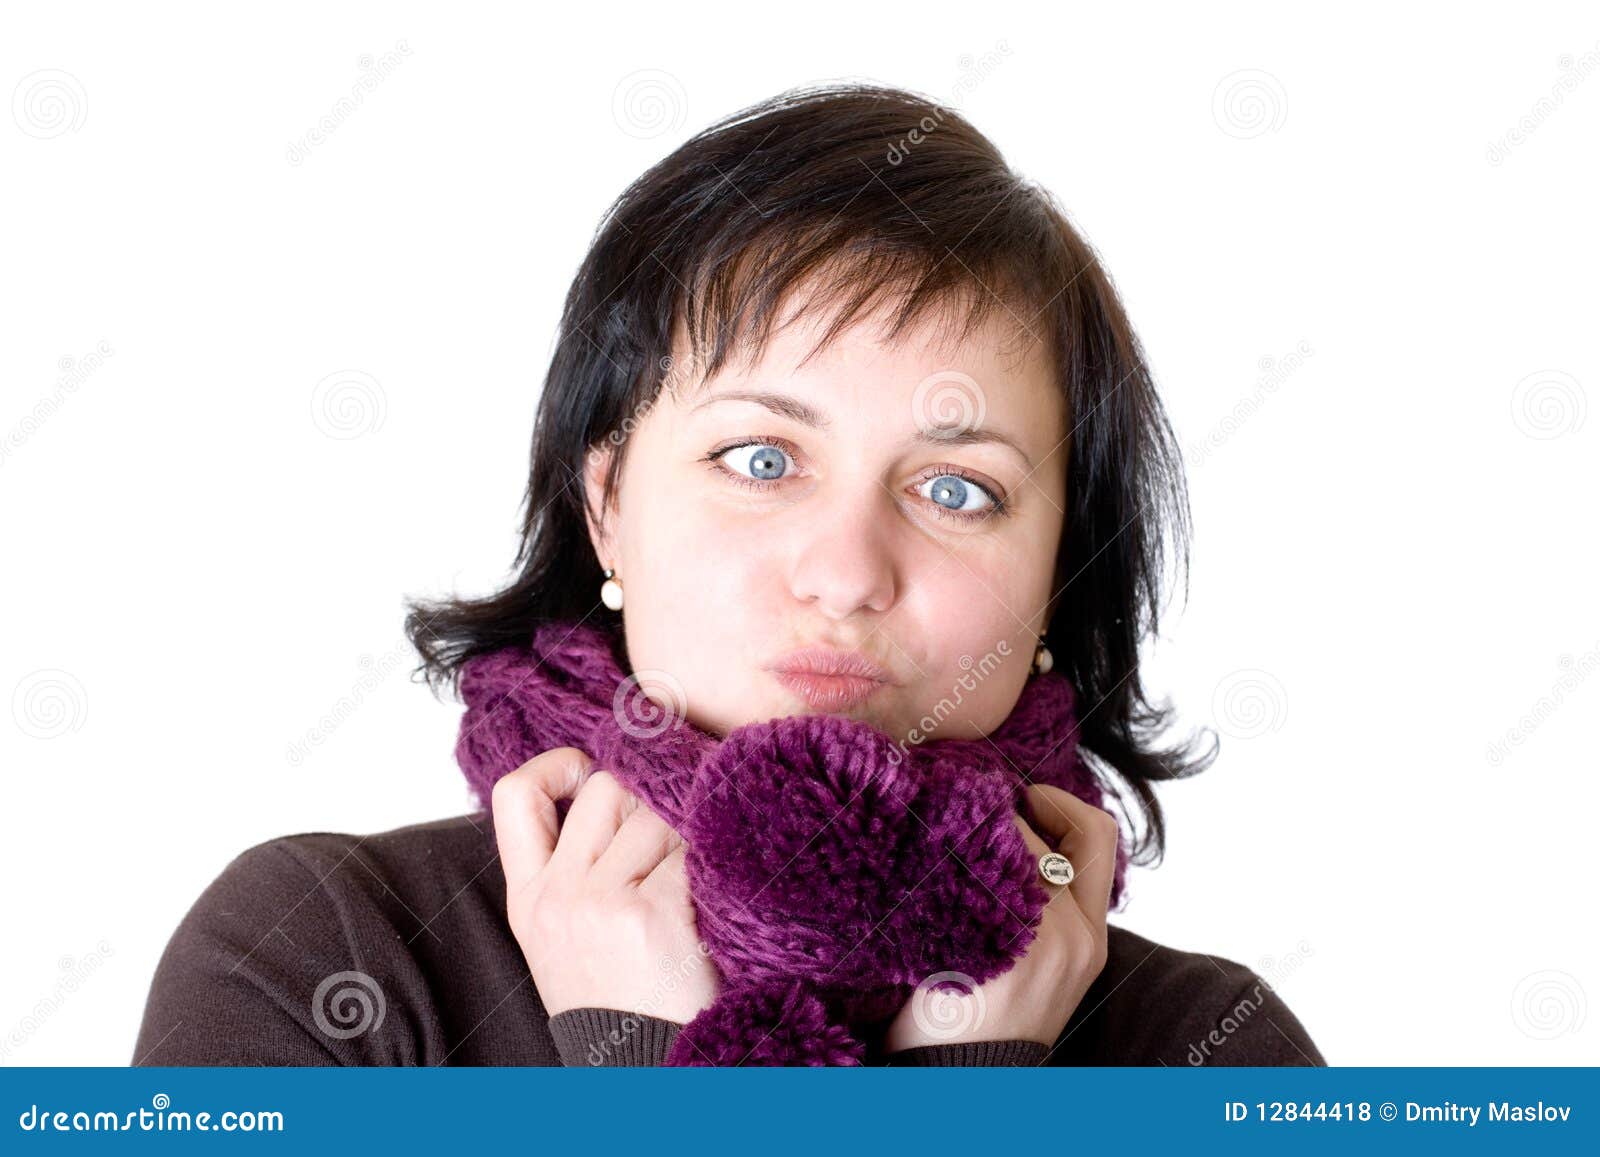 Royalty Free Stock Photos: Grimace